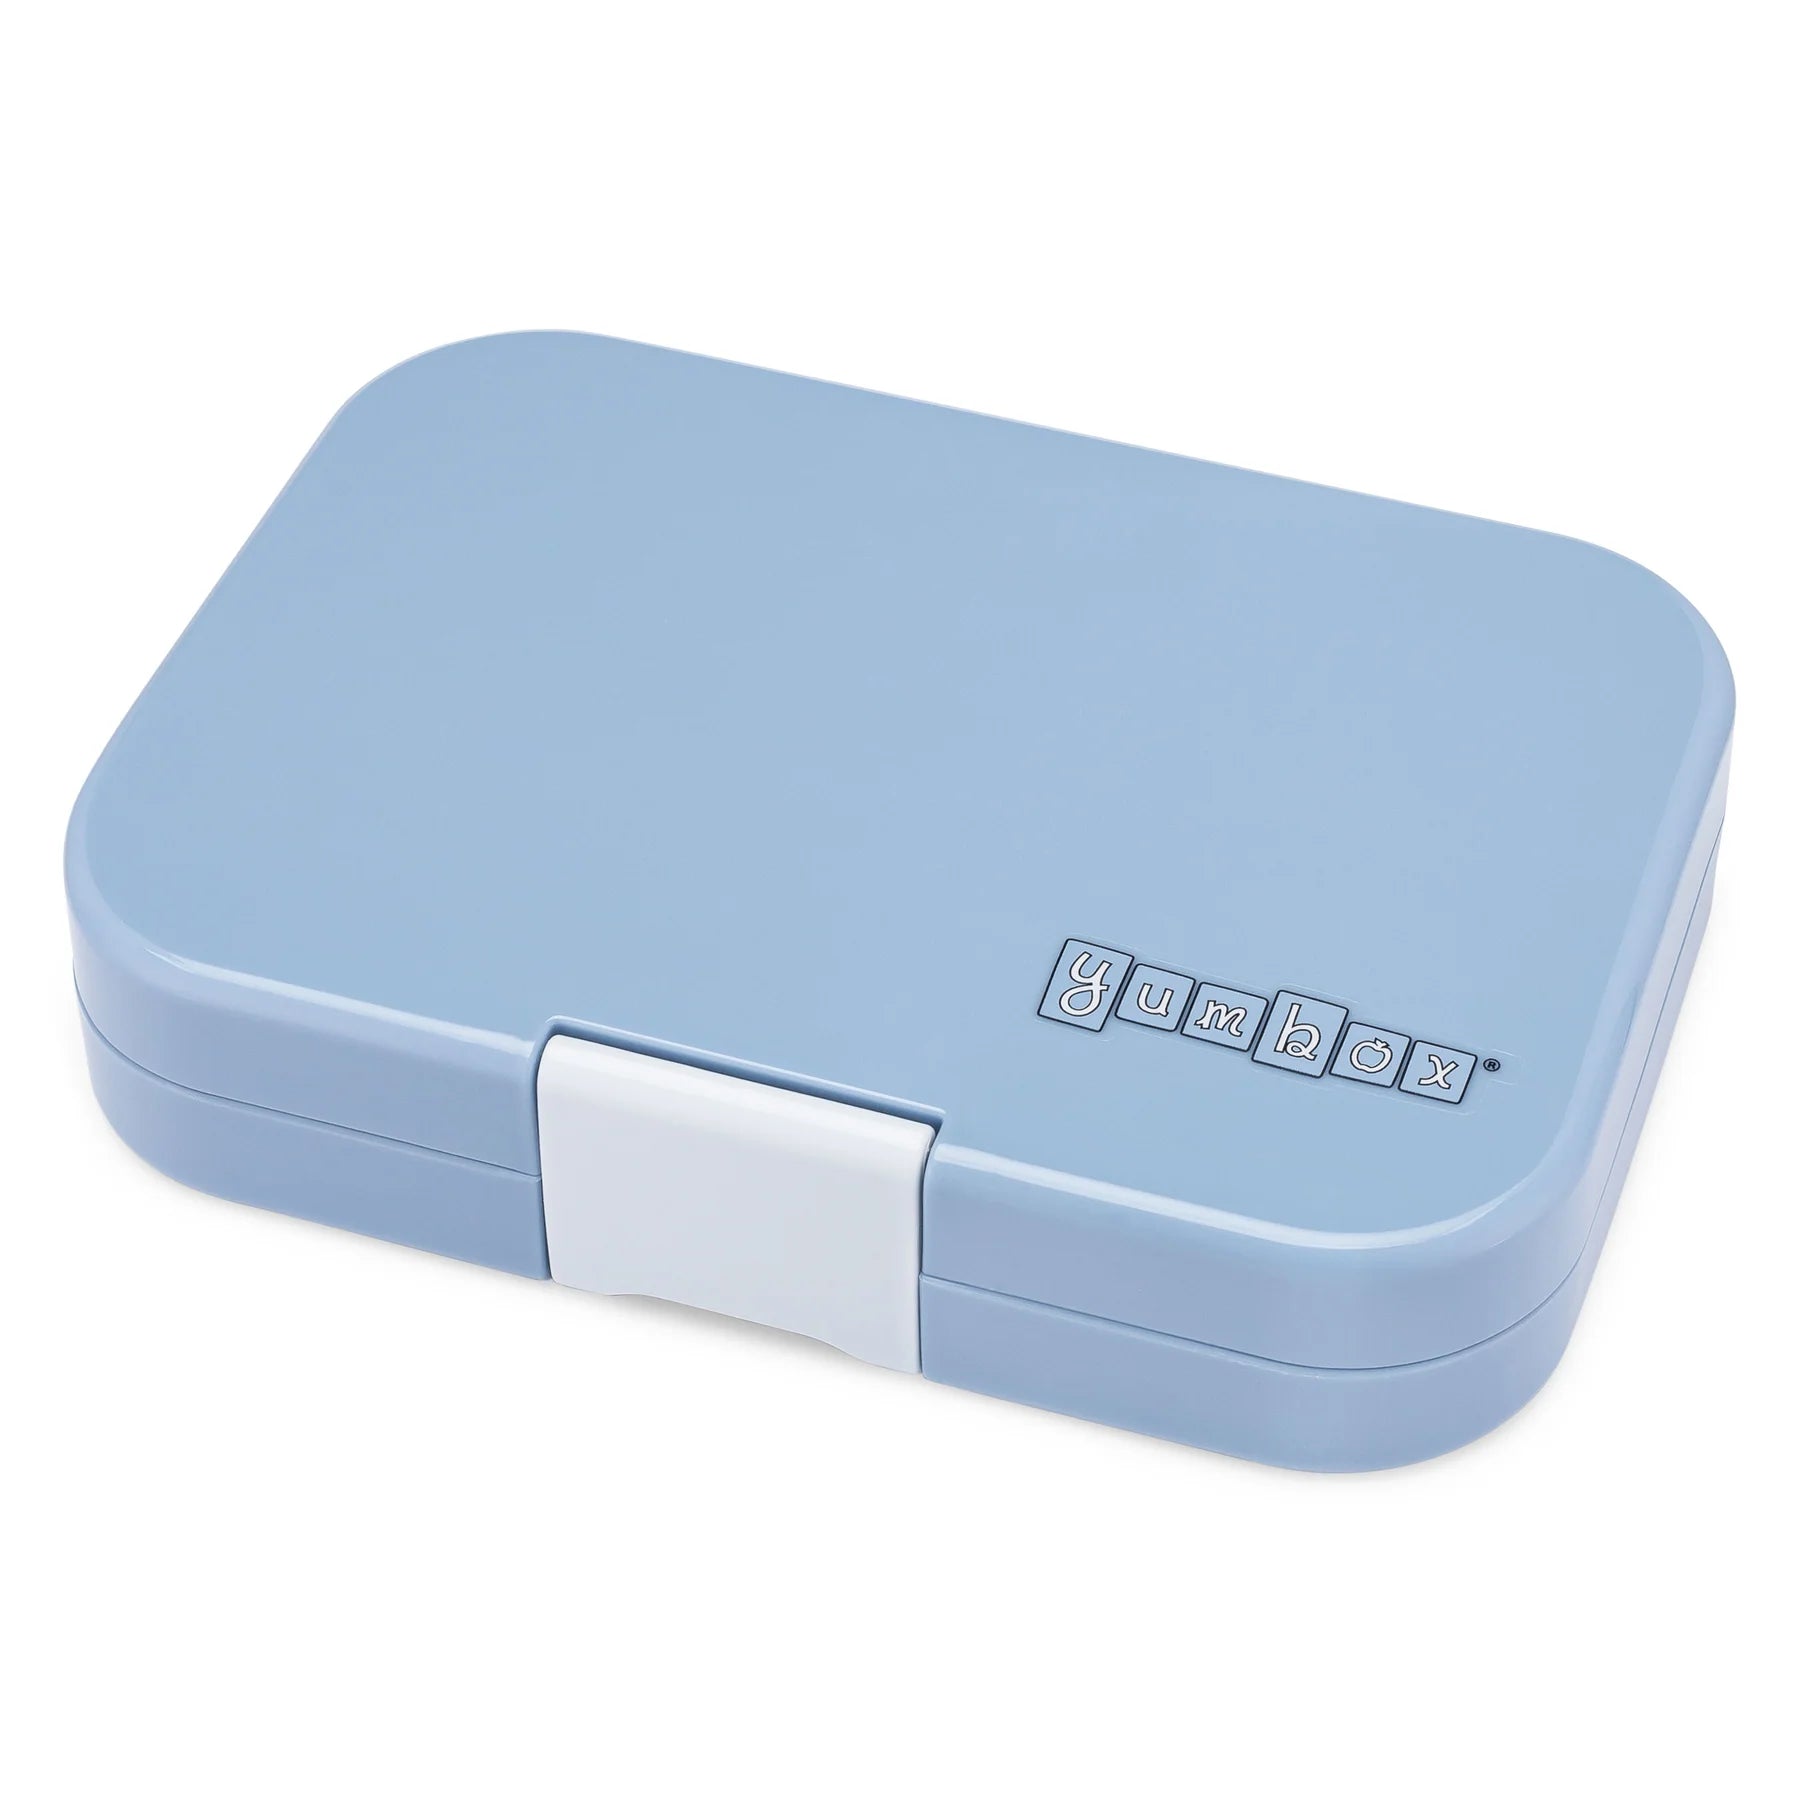 Yumbox Panino 4-Compartment Food Tray - Hazy Blue/Panther Tray 2